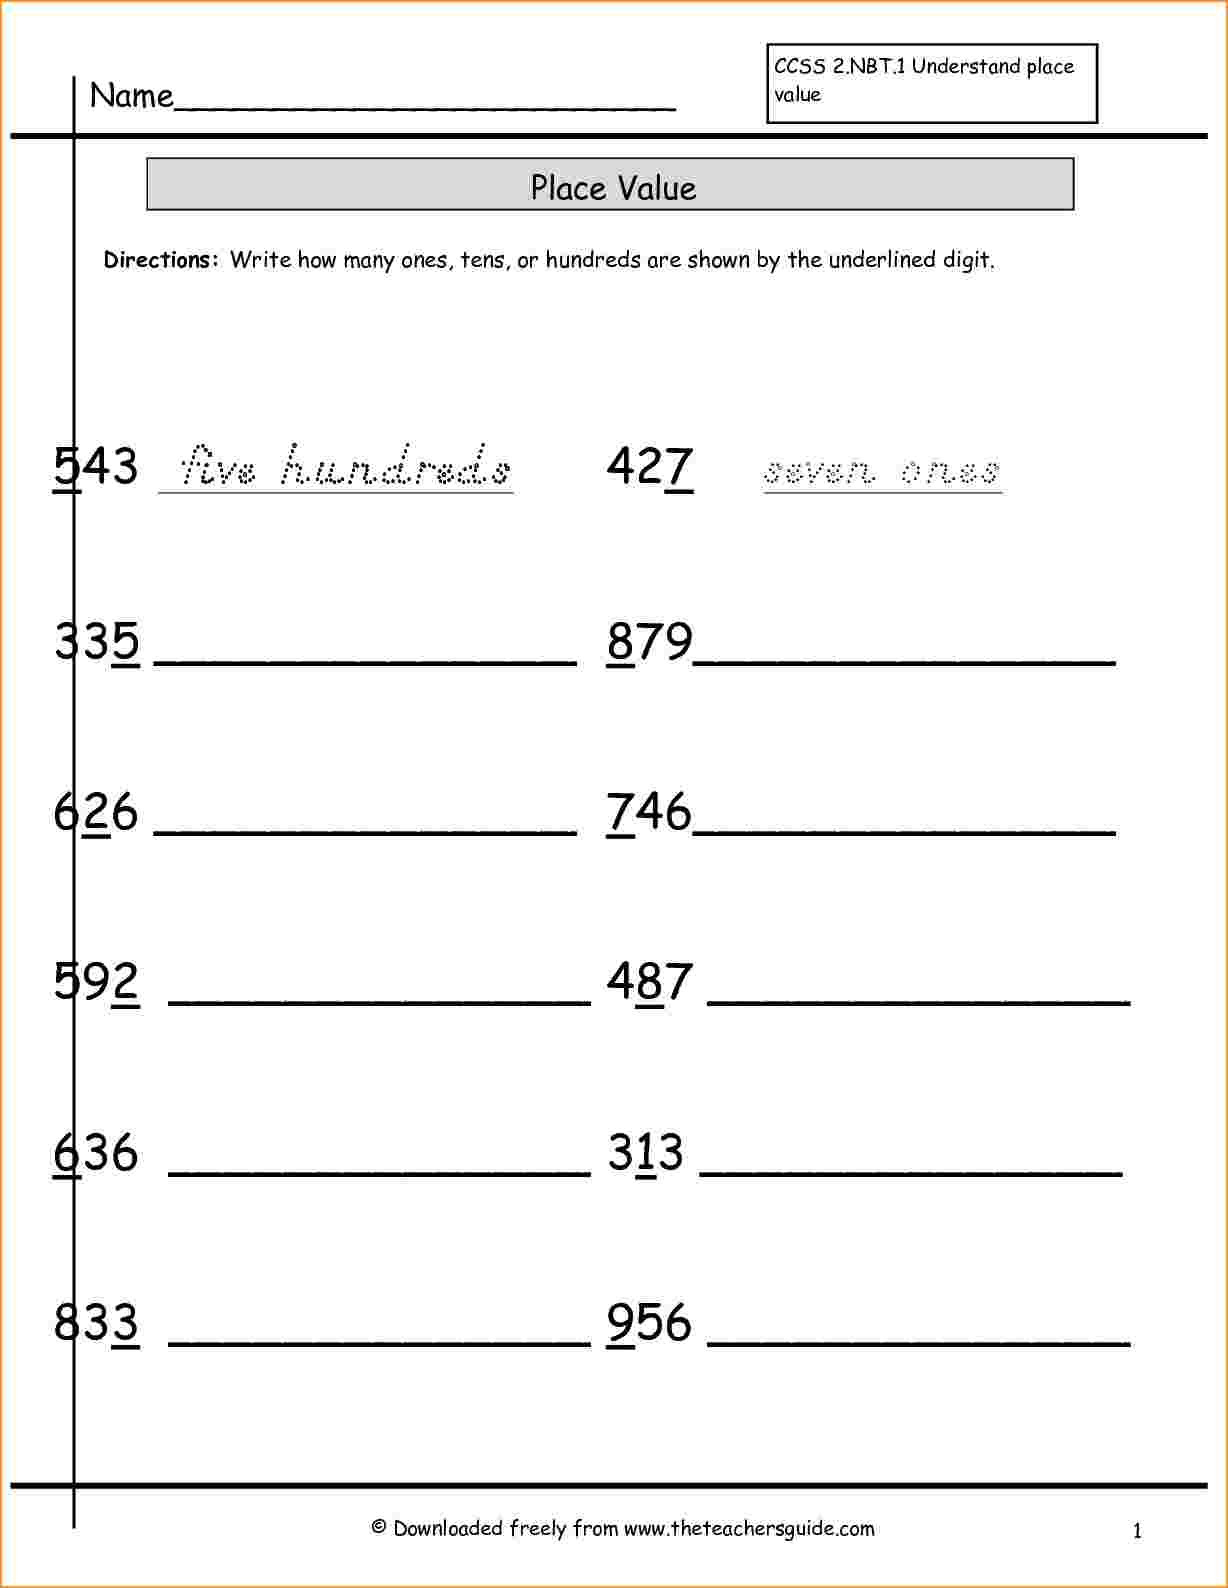 Free Printable Place Value Chart Best Of Place Value Worksheets For - Free Printable Place Value Chart